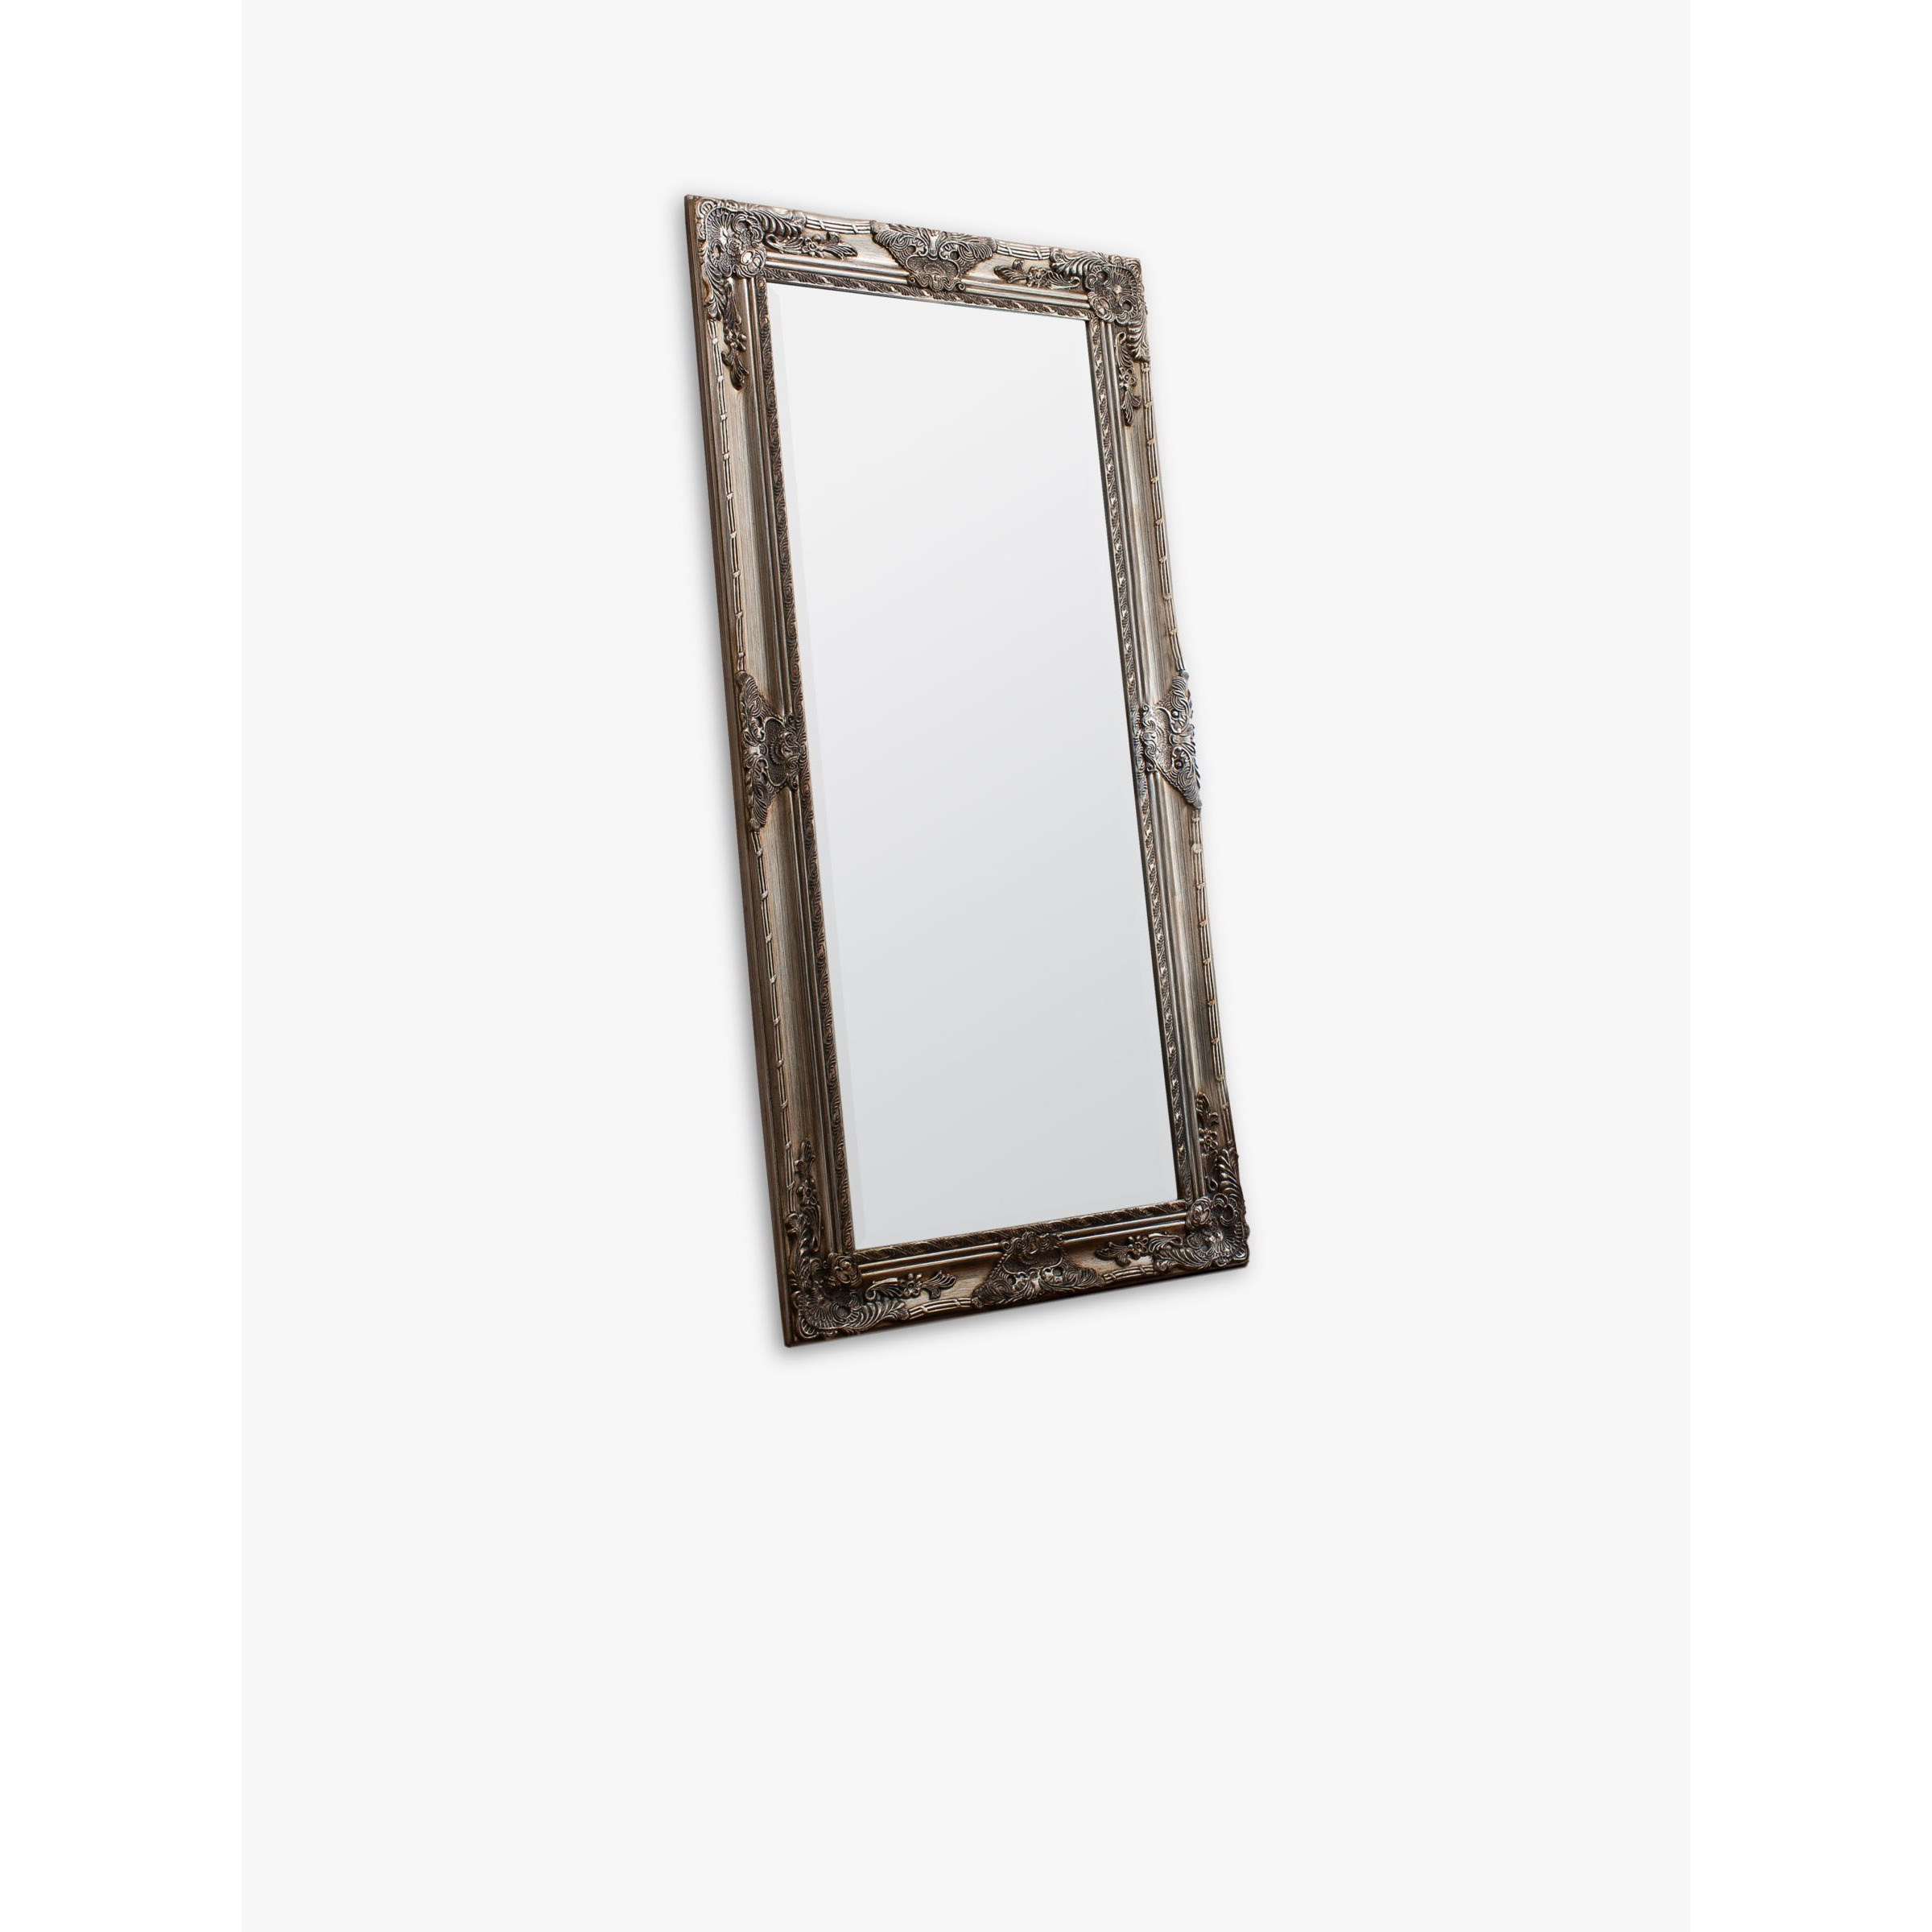 Gallery Direct Hampshire Rectangular Decorative Frame Leaner / Wall Mirror, 170 x 84cm - image 1